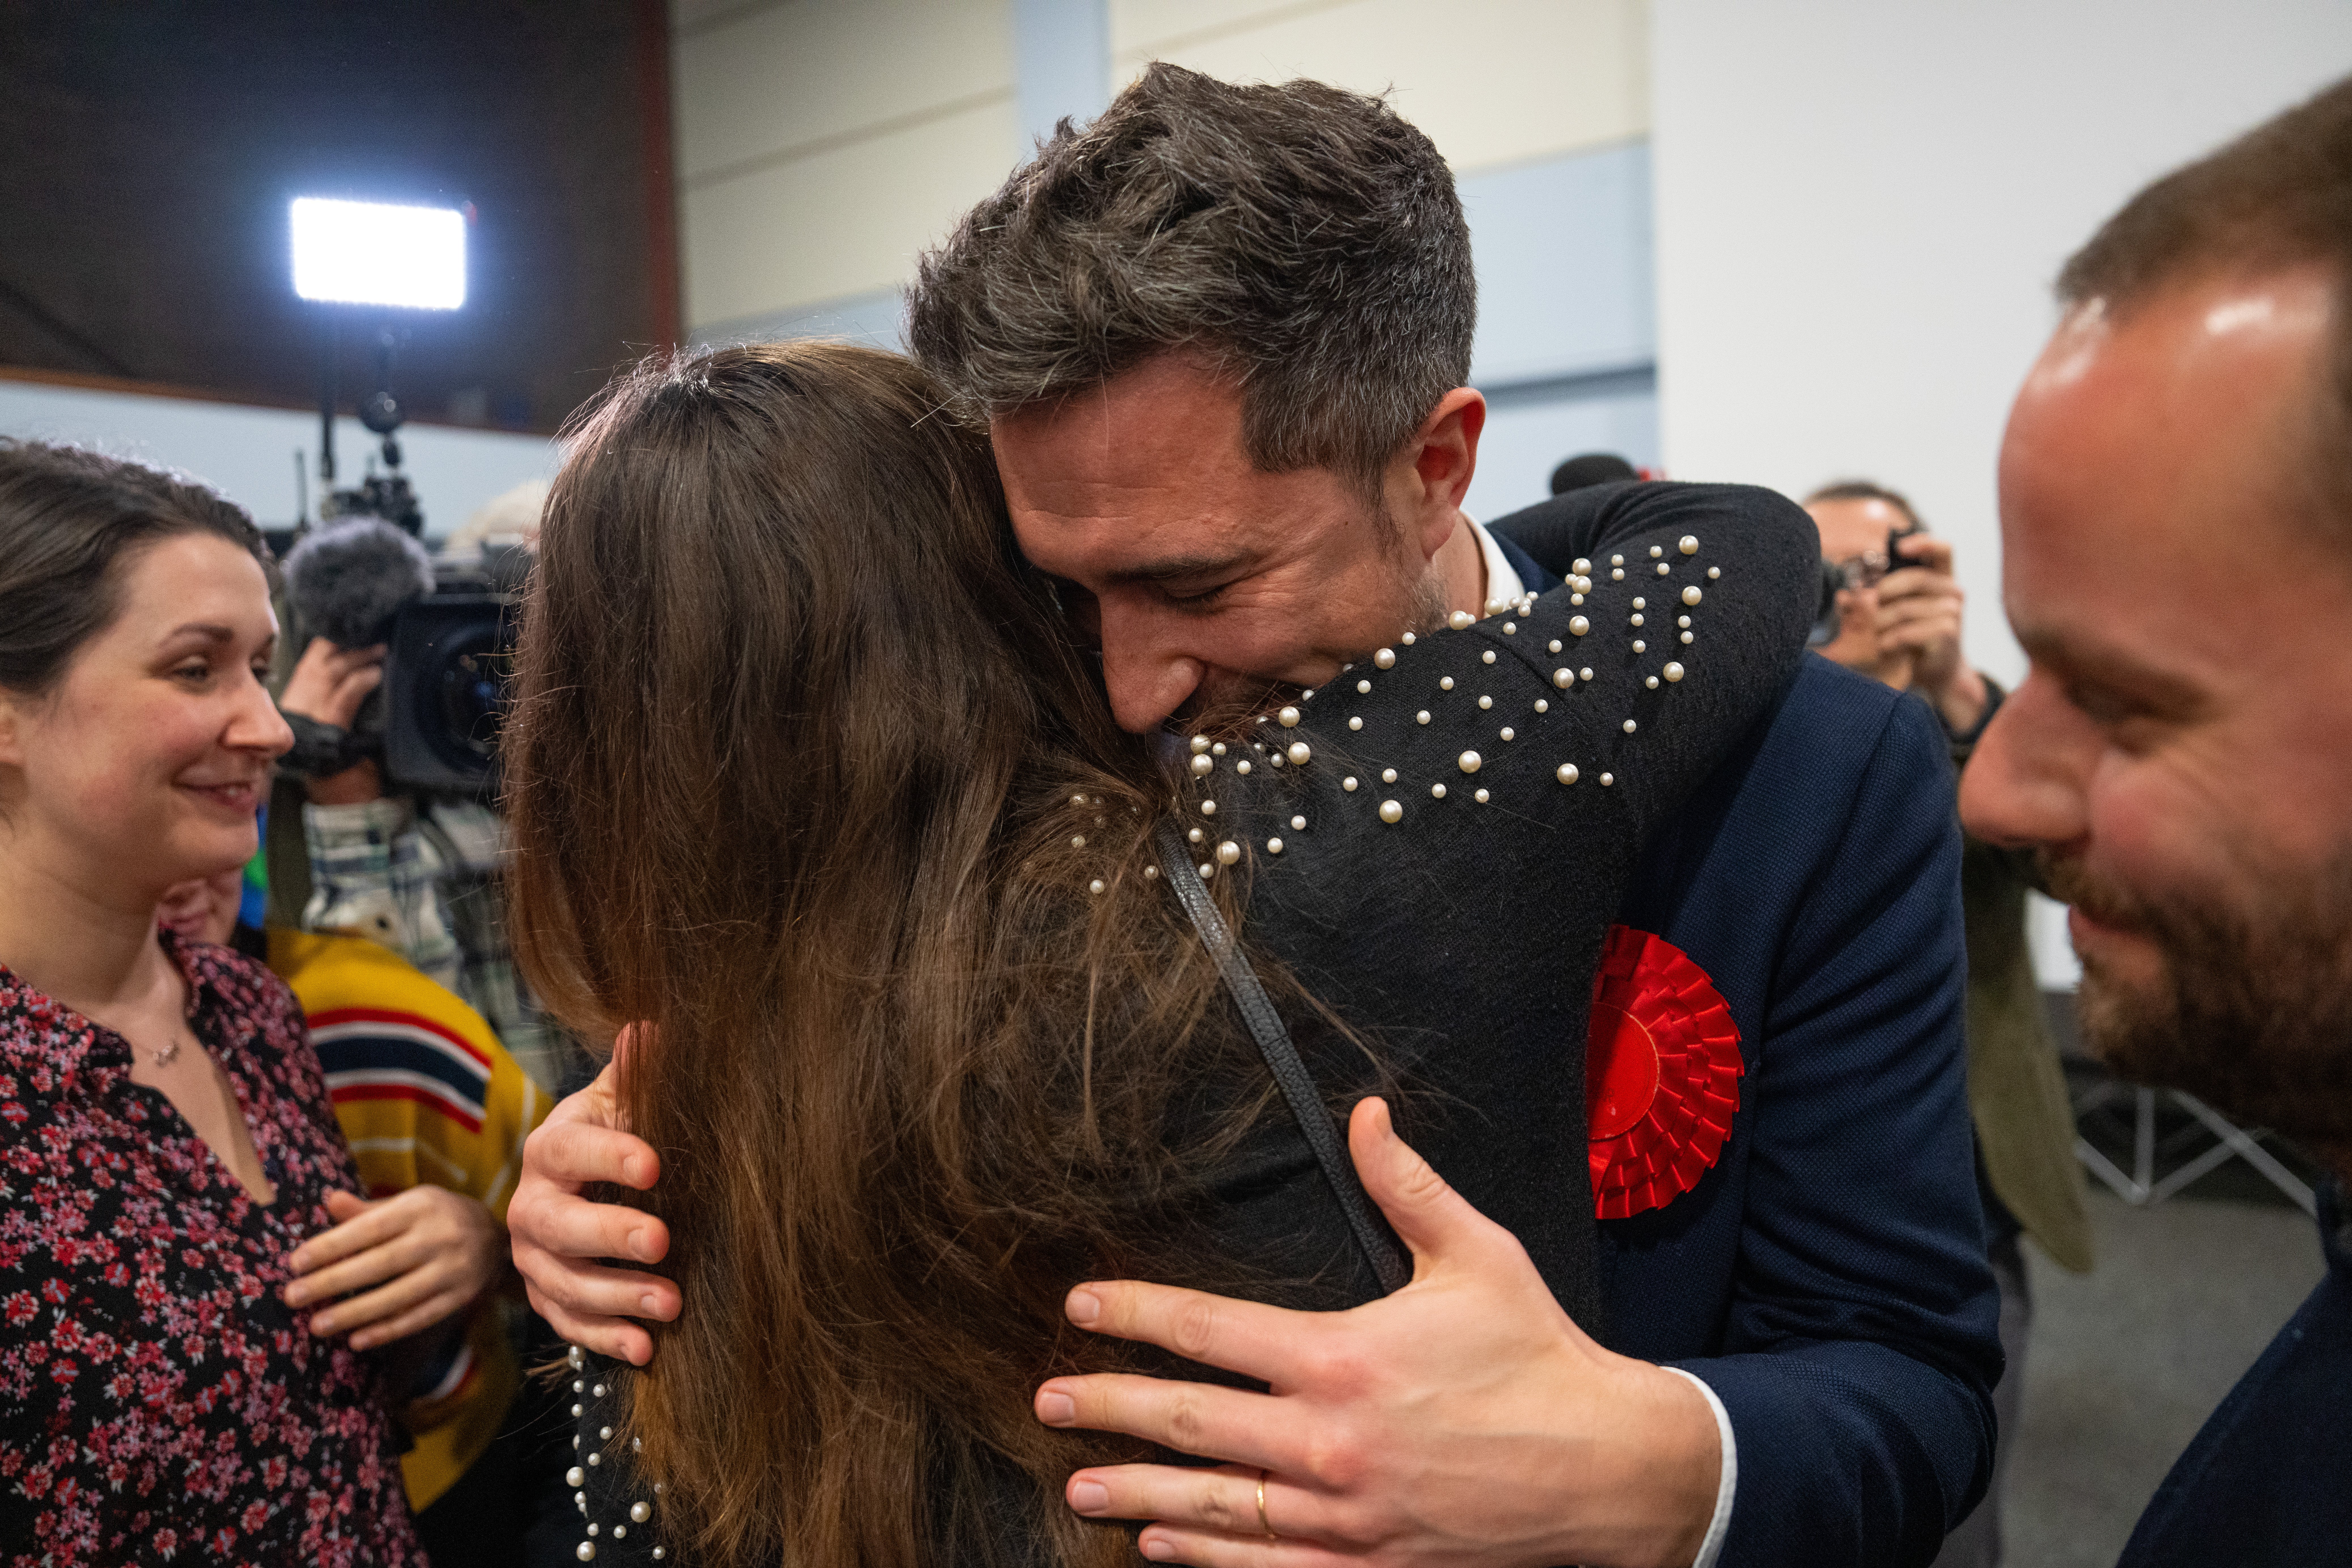 Labour Party candidate, Damien Egan, is hugged after being declared the winner in the Kingswood by-election